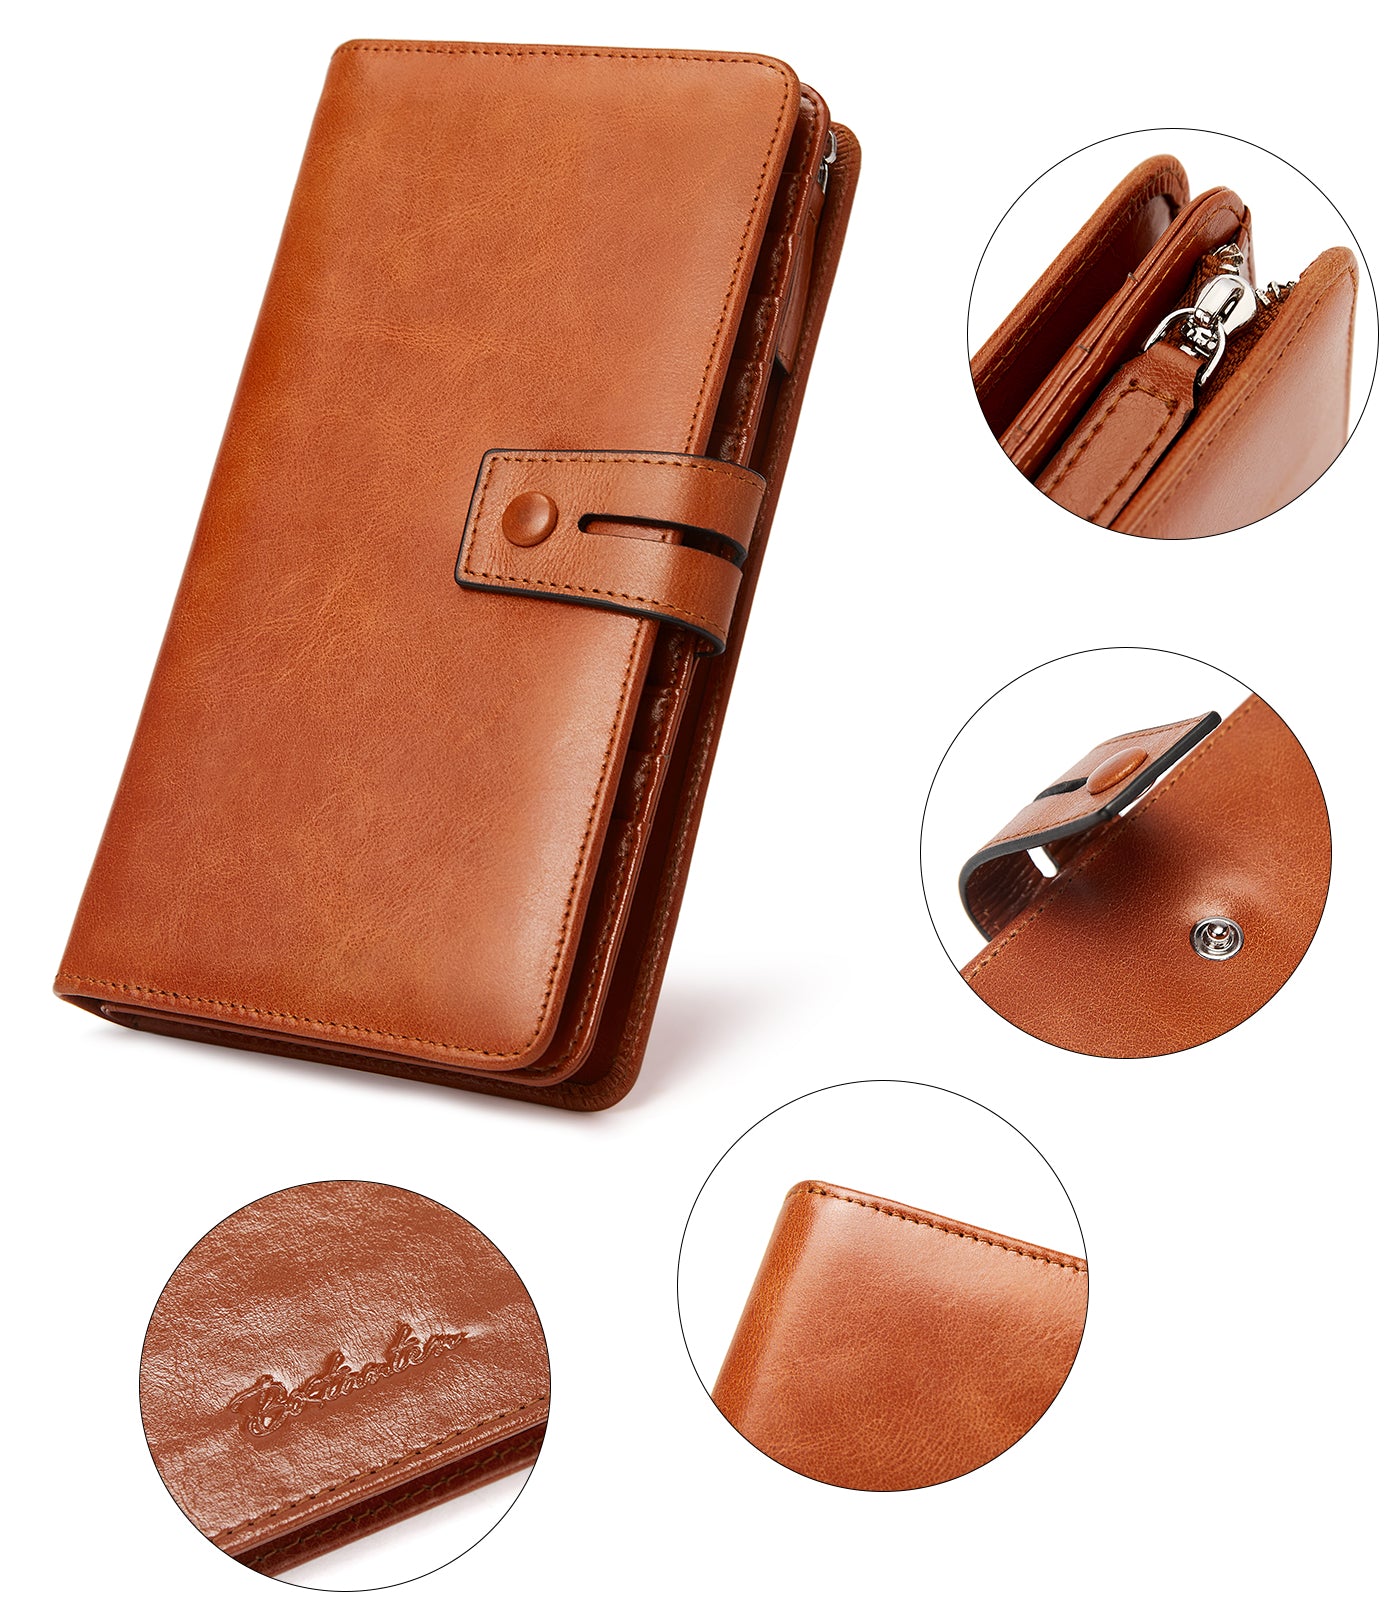 CLN - Looking for the perfect sized wallet? Check out our wallet